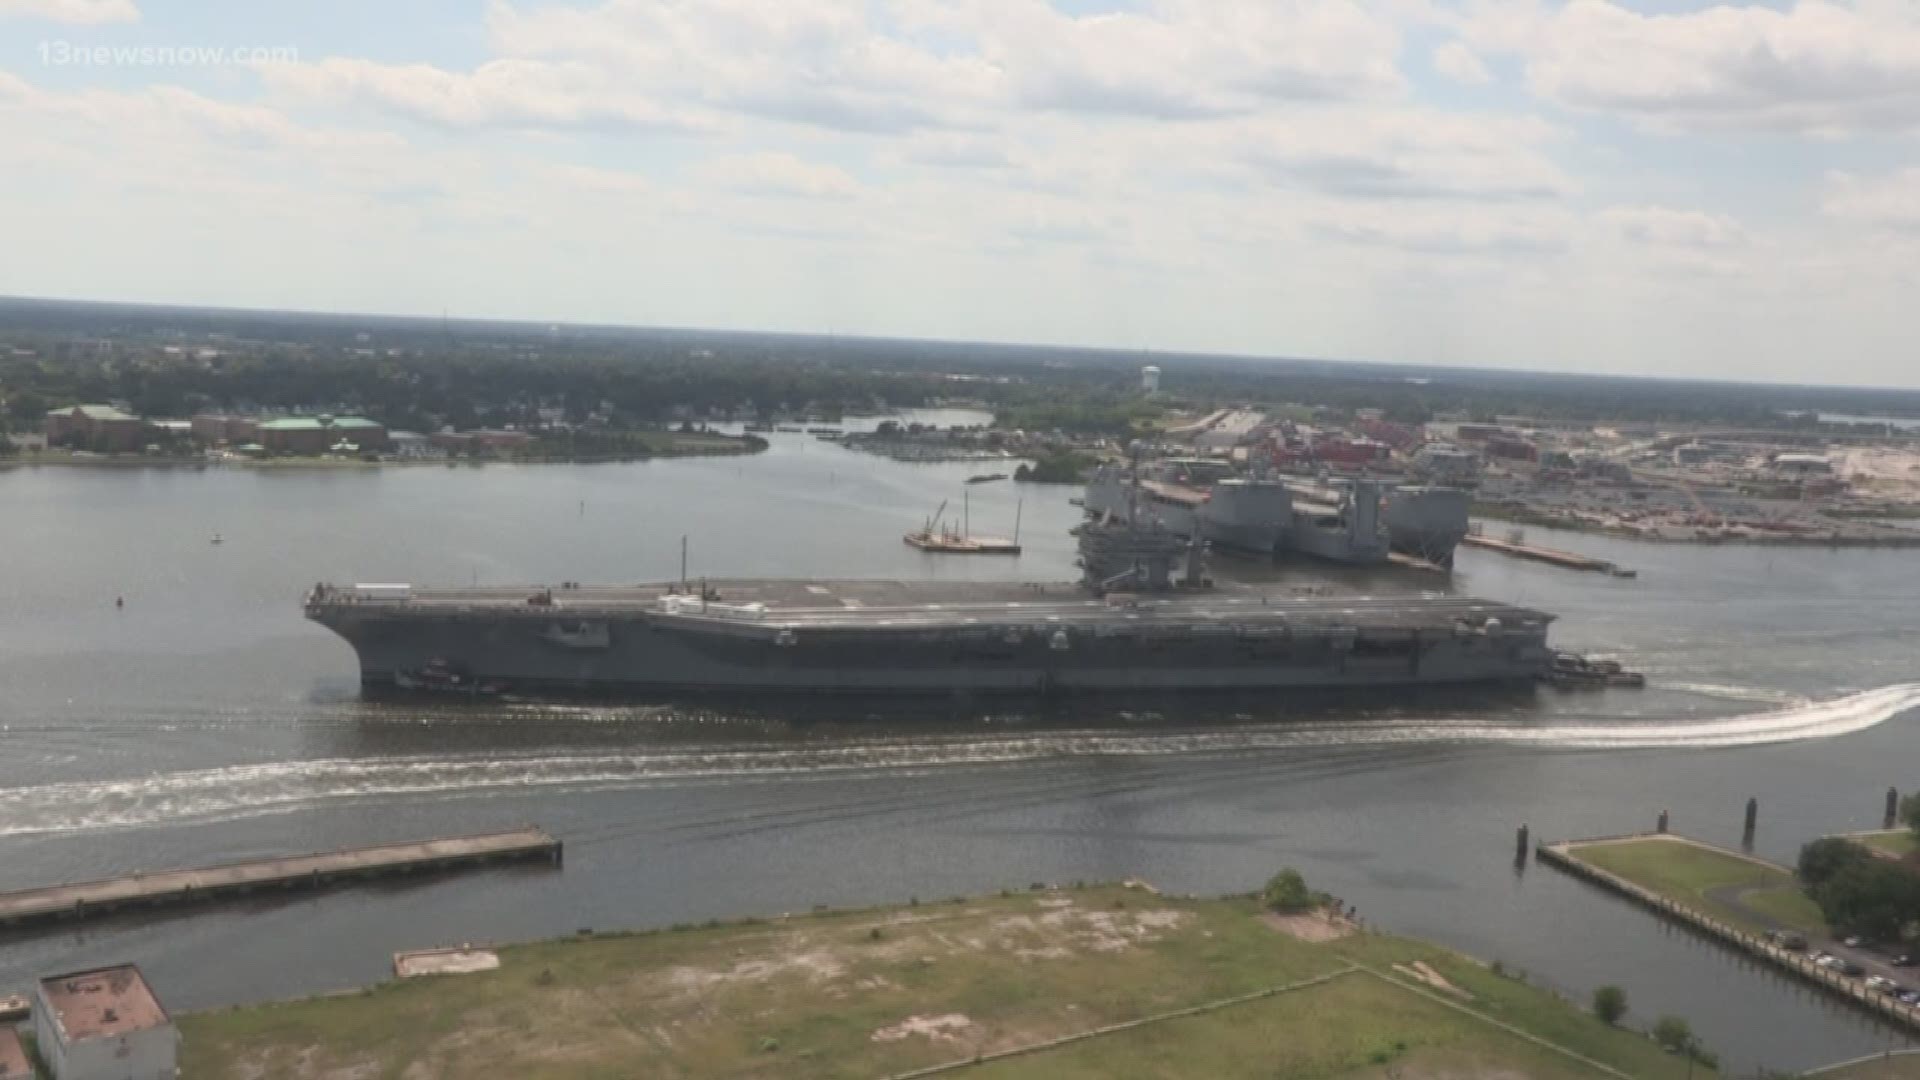 USS Harry S. Truman returned to sea to make some final preparations ahead of deployment. This comes after several months of maintenance.